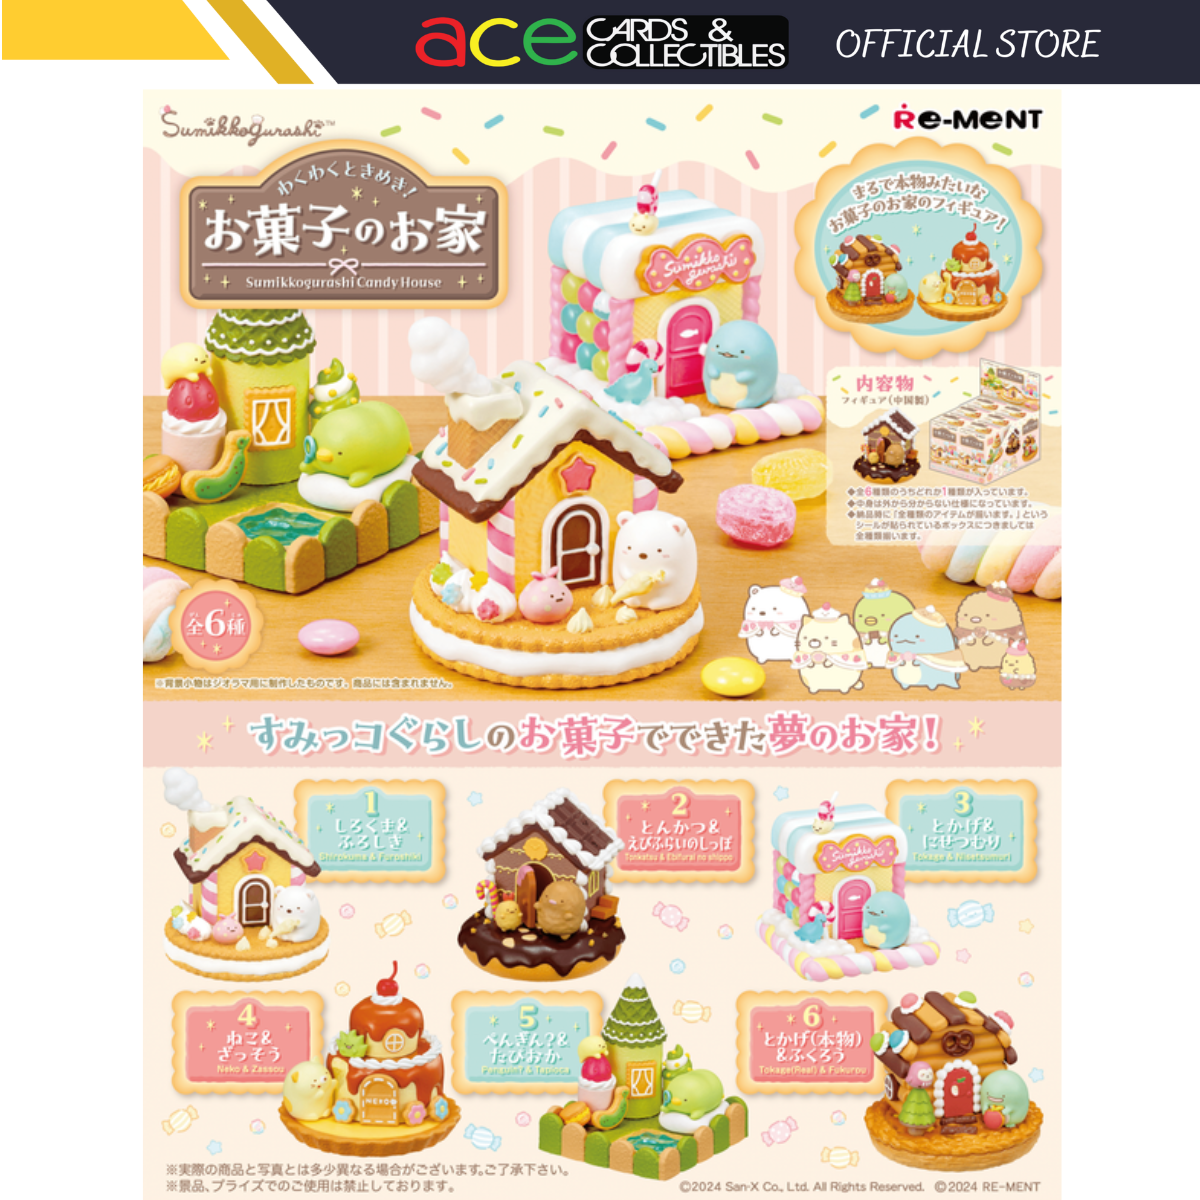 Re-Ment Sumikko Candy House-Complete Set of 6-Re-Ment-Ace Cards & Collectibles